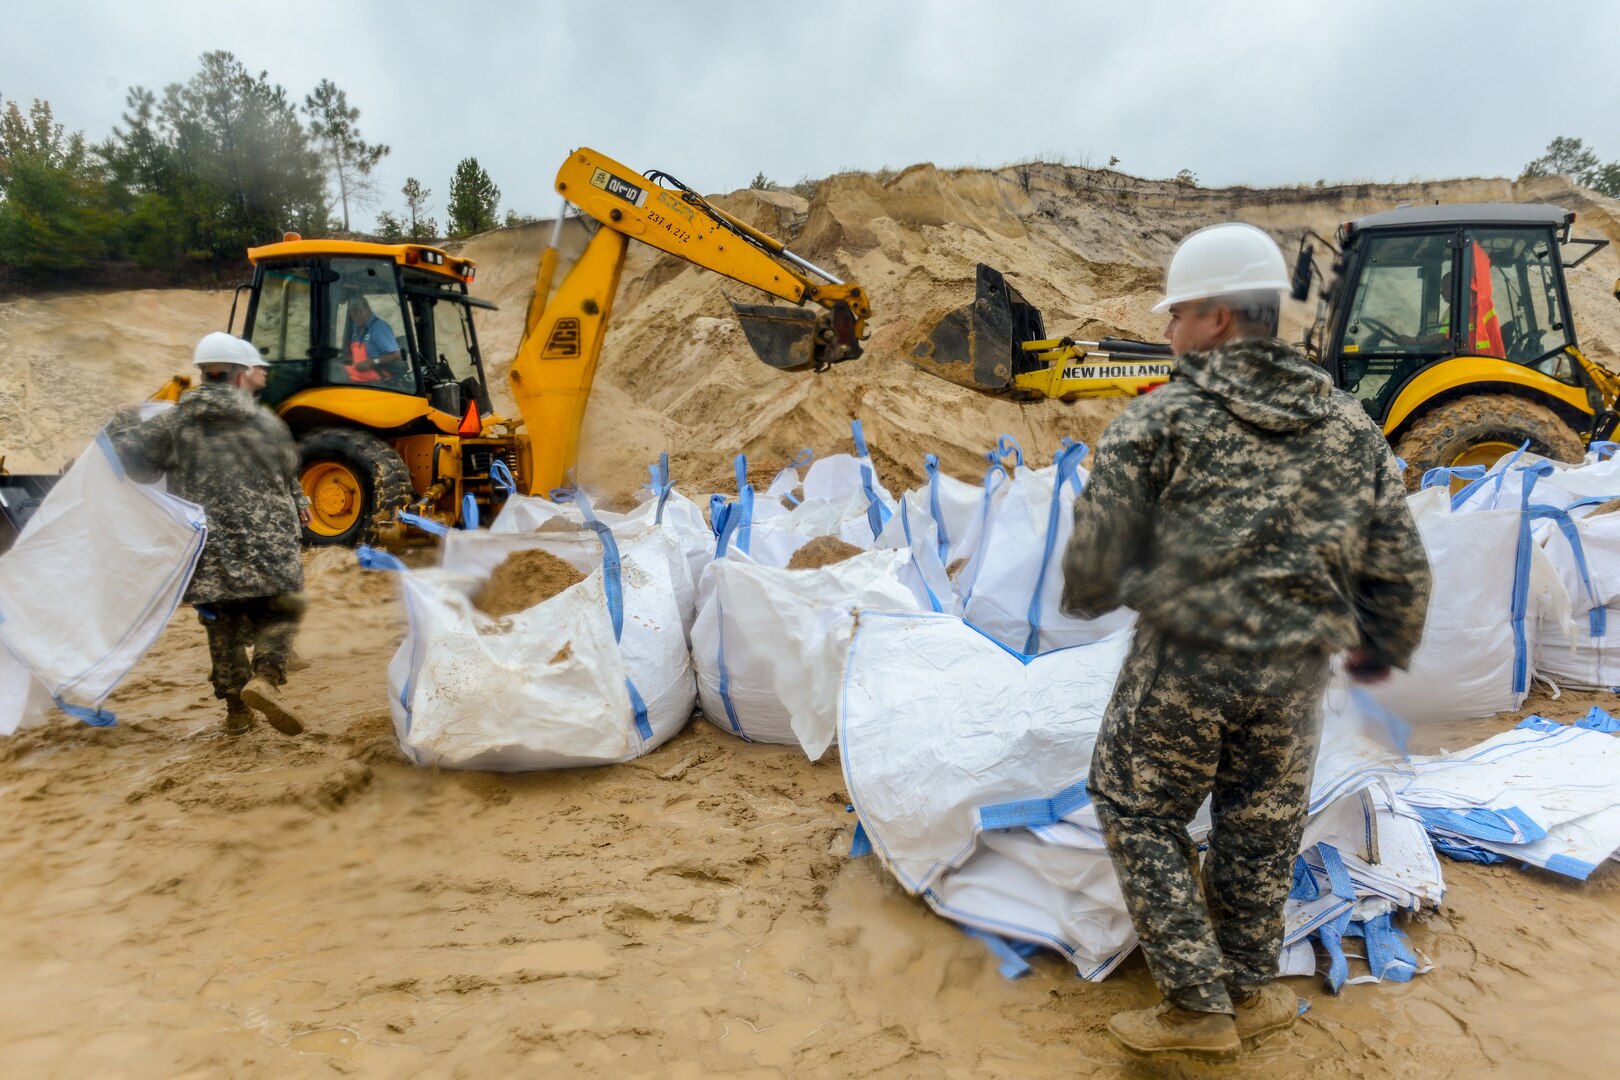 South Carolina National Guard Soldiers and S.C. Department of Transportation fill sandbags in preparation of possible flooding caused by Tropical Storm Florence, September 15, 2018.